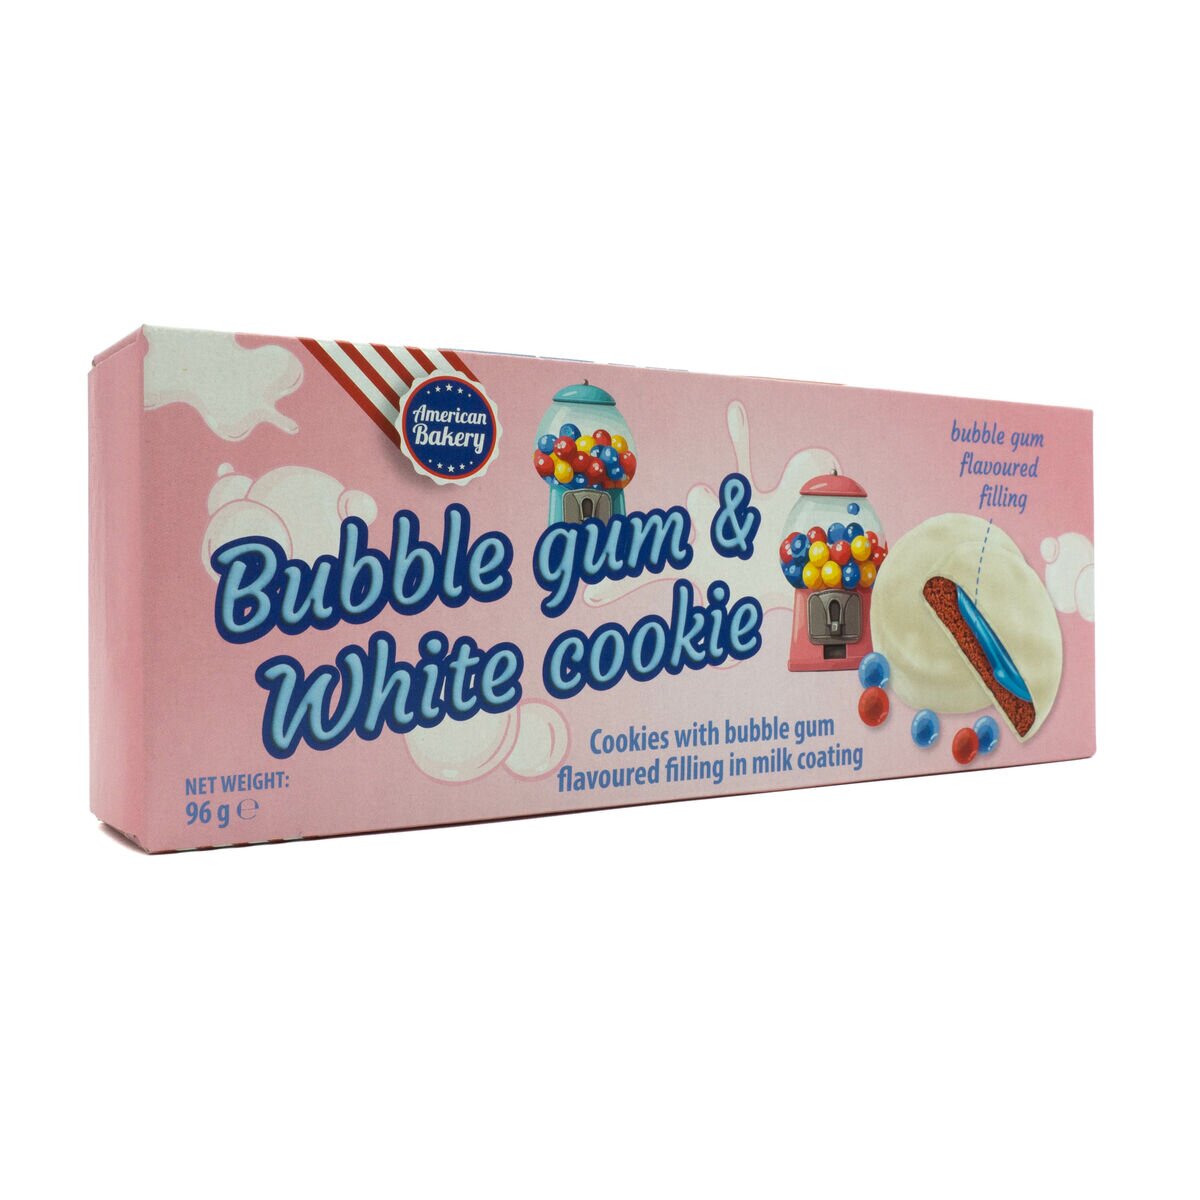 American Bakery Brownie Bubble Gum & White Cookie (96g)